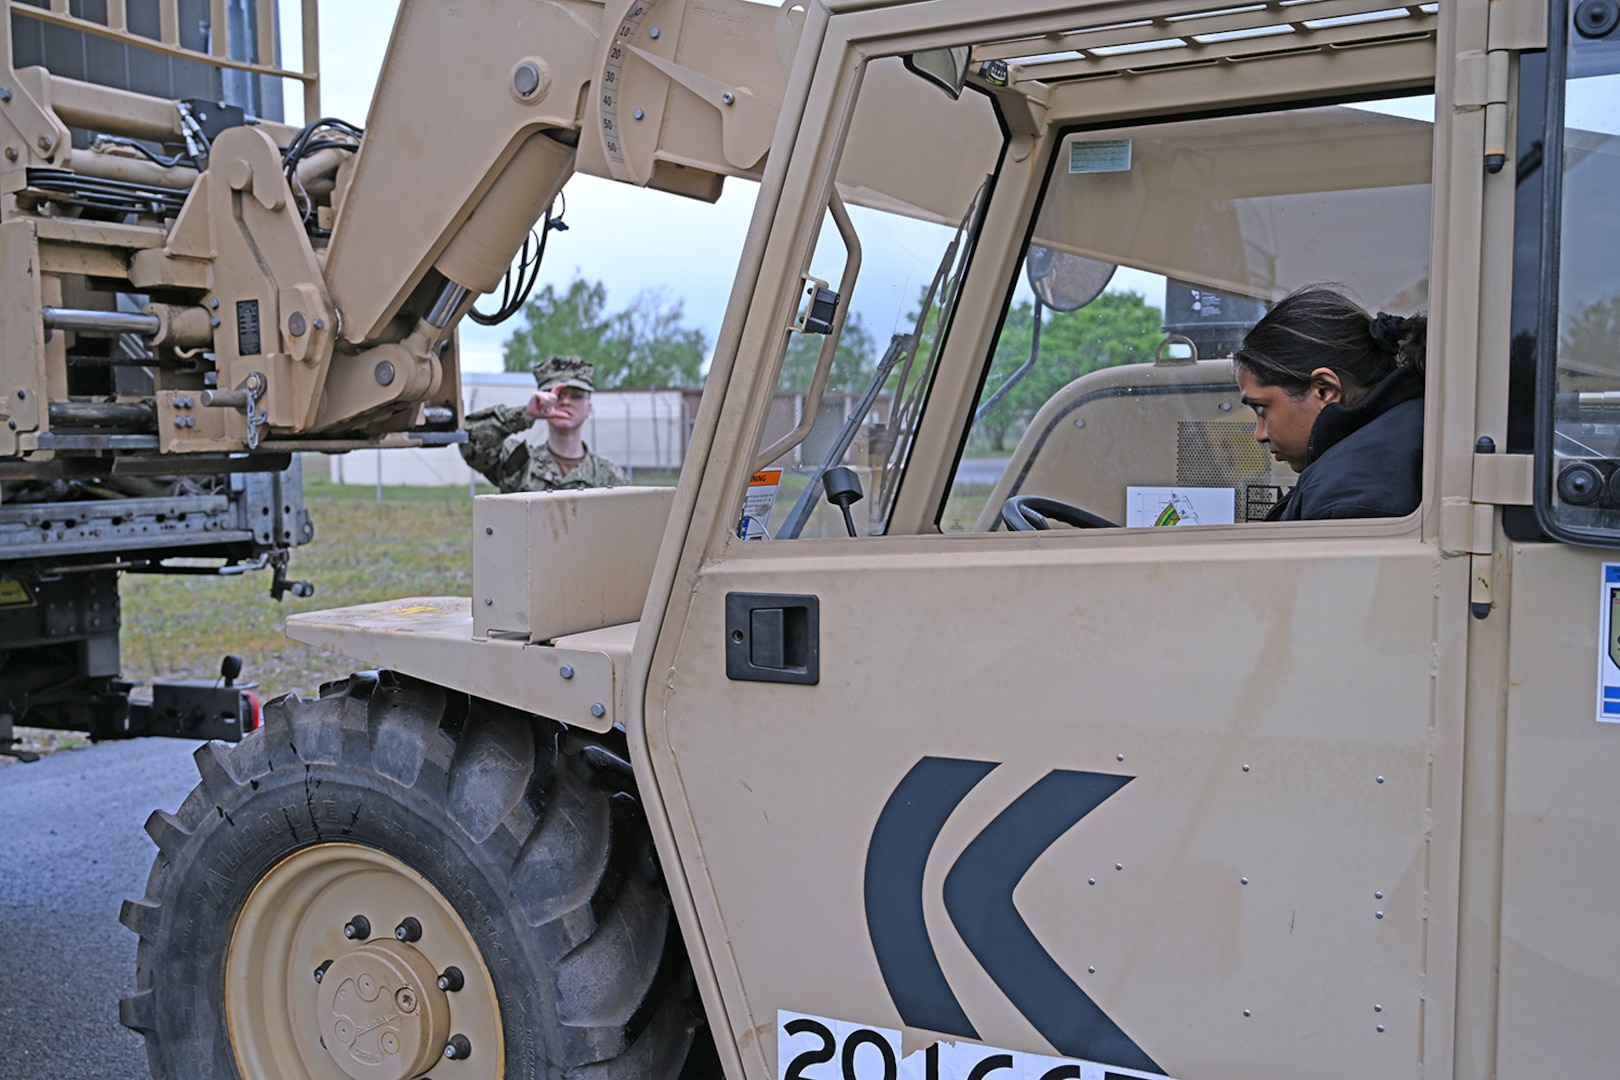 A person in camo uniform directs another person in a camo uniform driving a tan vehicle